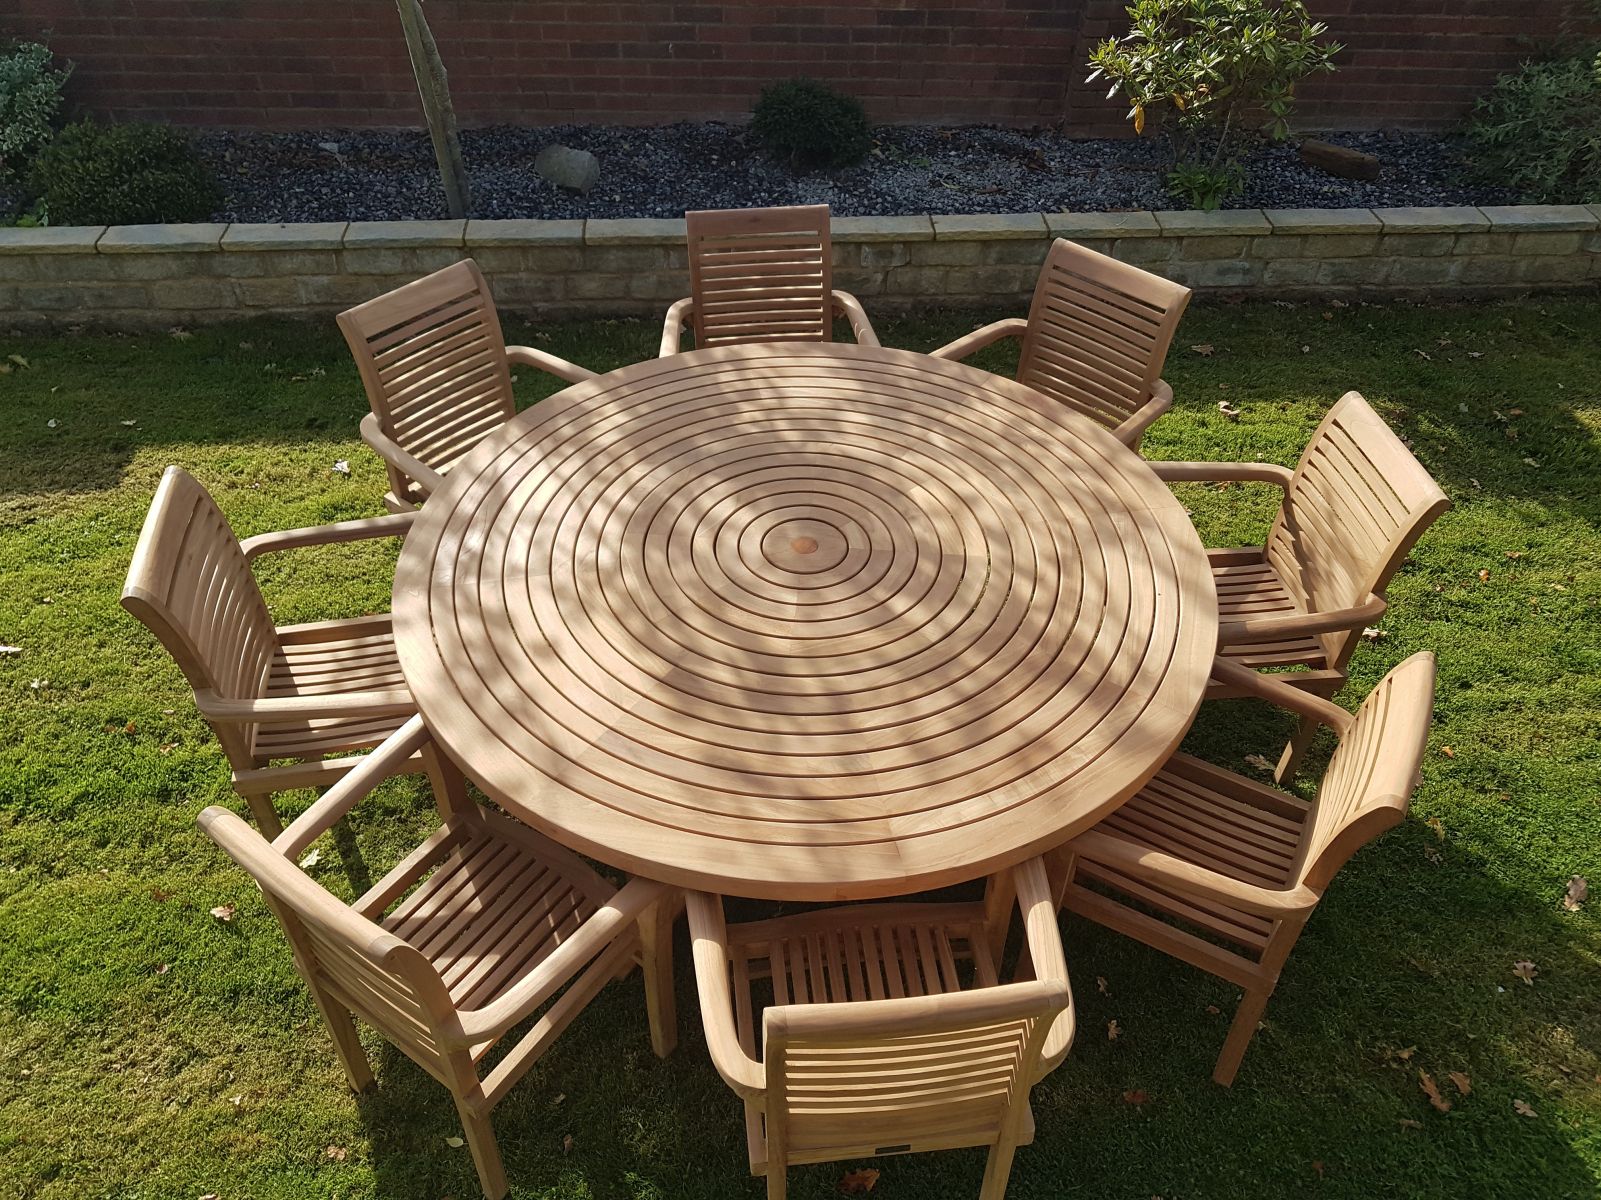 Teak Garden Furniture Round Table With 8 Stacking Chairs – Chelsea Home Intended For Teak Armchair Round Patio Dining Sets (View 11 of 15)